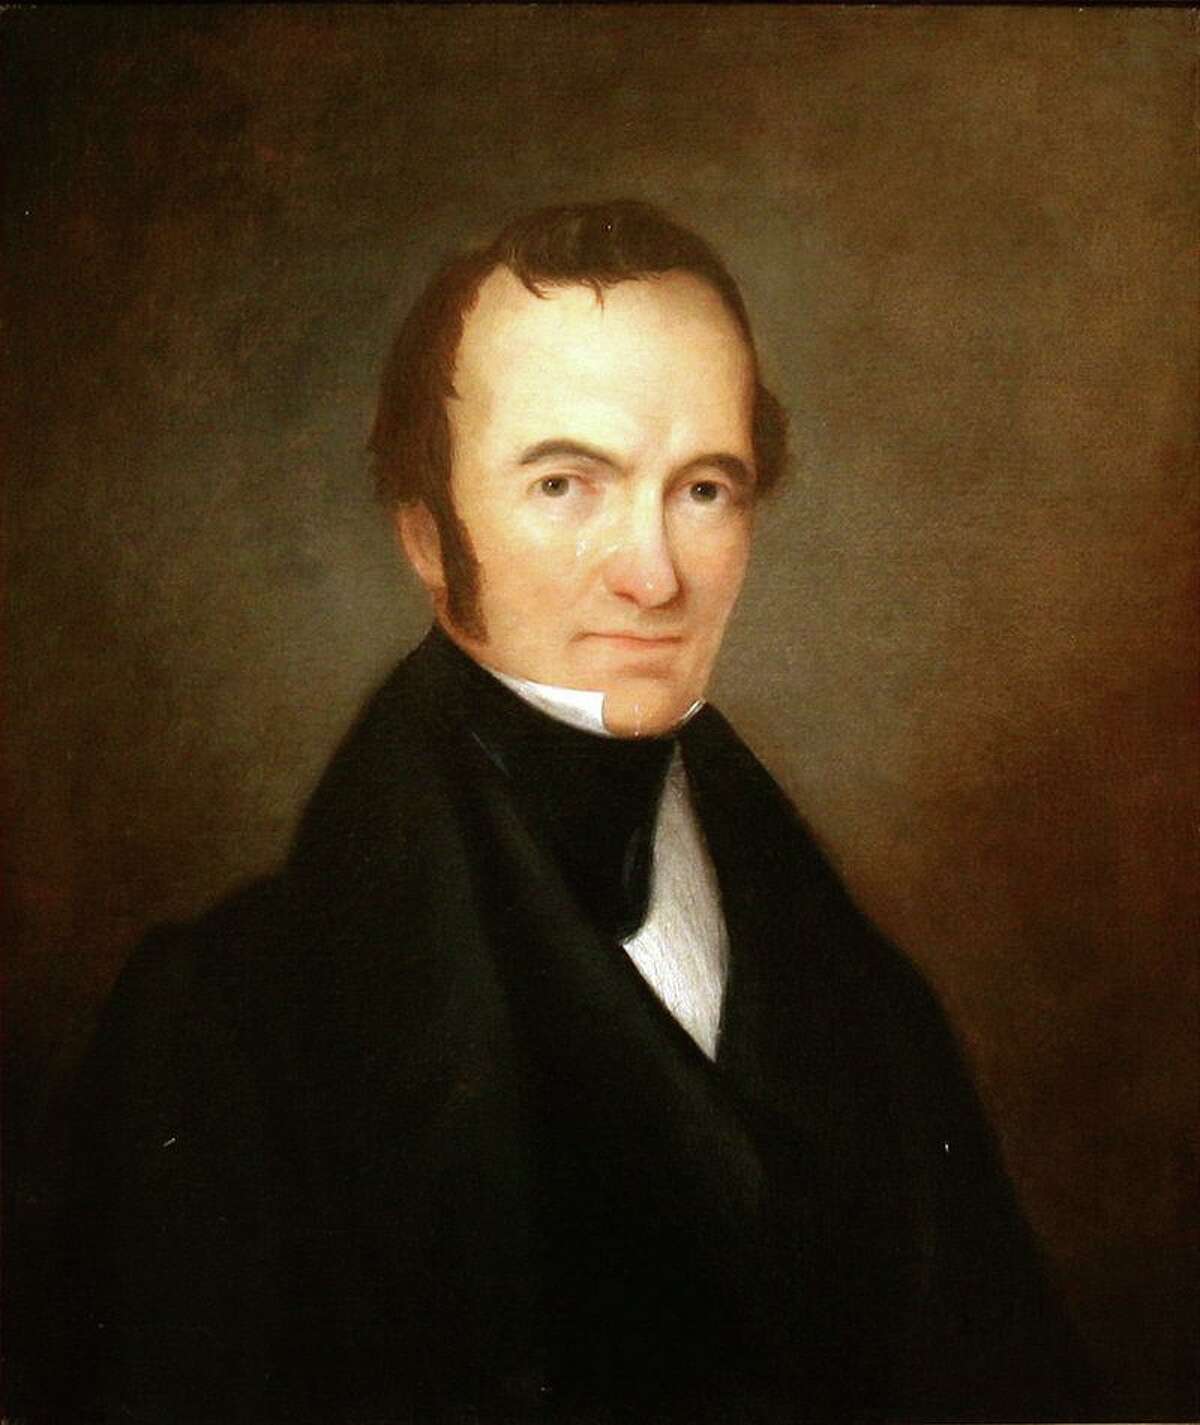 Legend has it that Anglo colonist Stephen F. Austin negotiated the first boundary agreement with Native Americans at the Treaty Oak, thought to have been a sacred site.